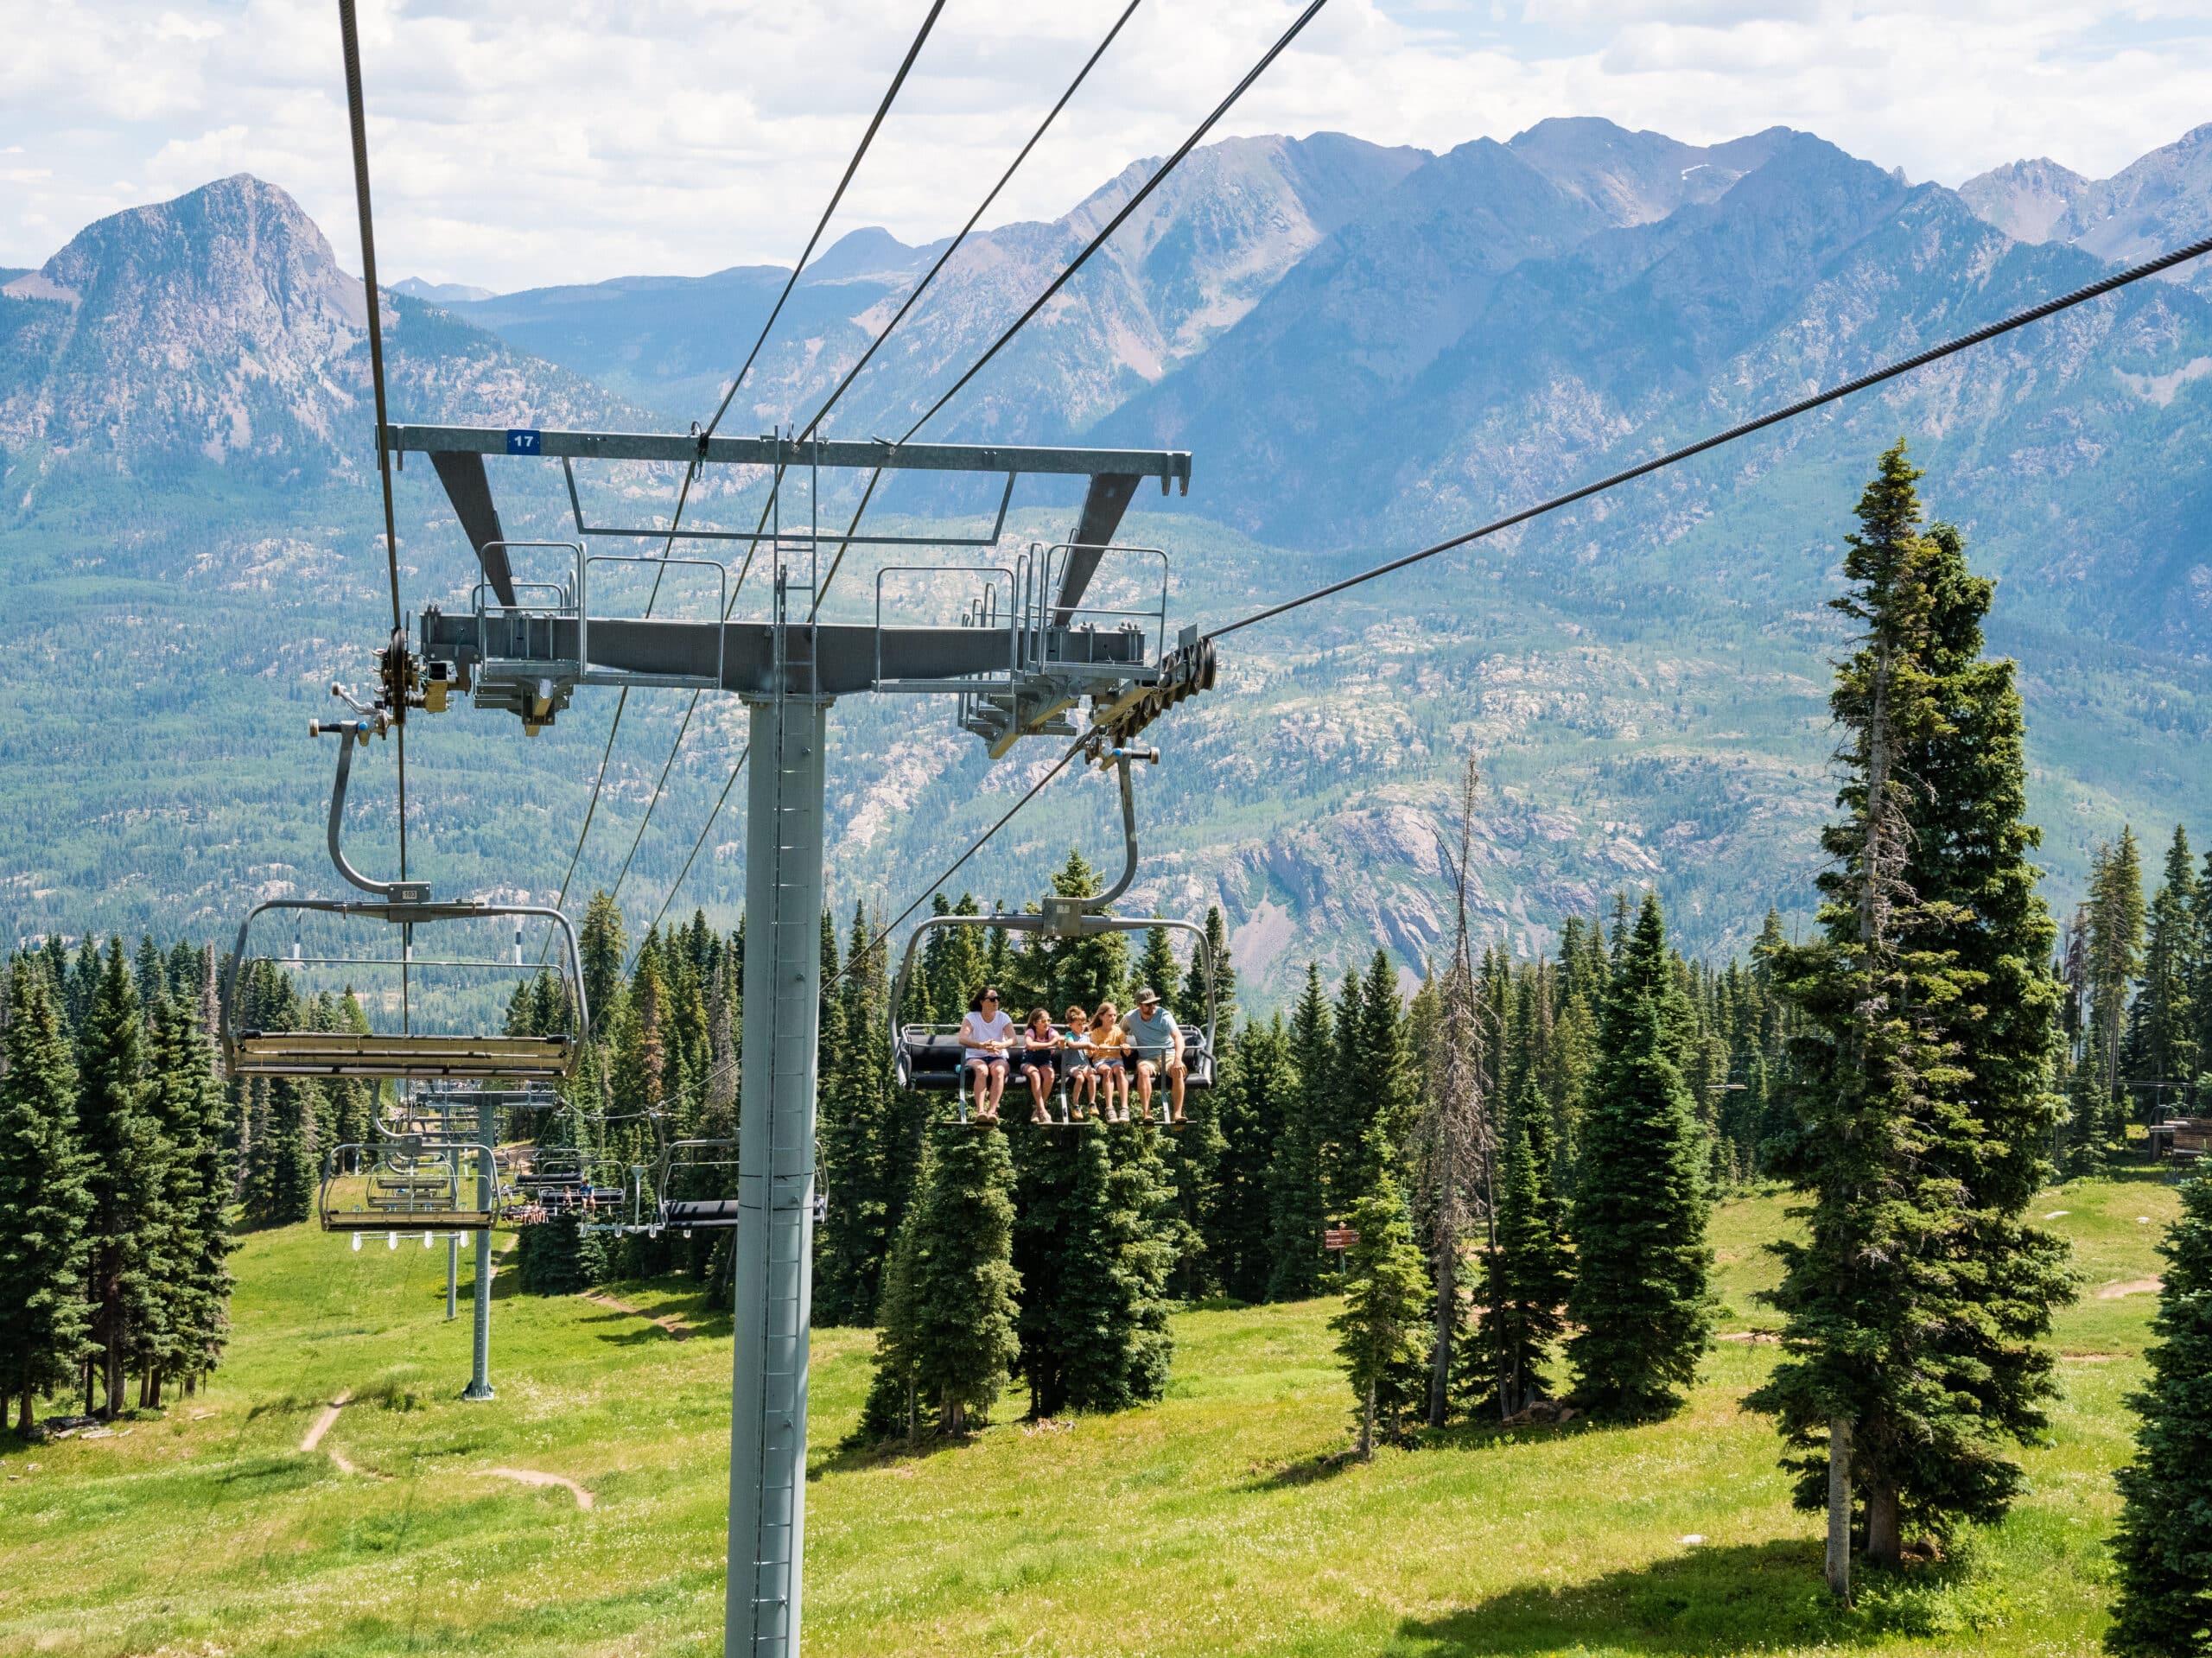 A family rides the scenic chairlift